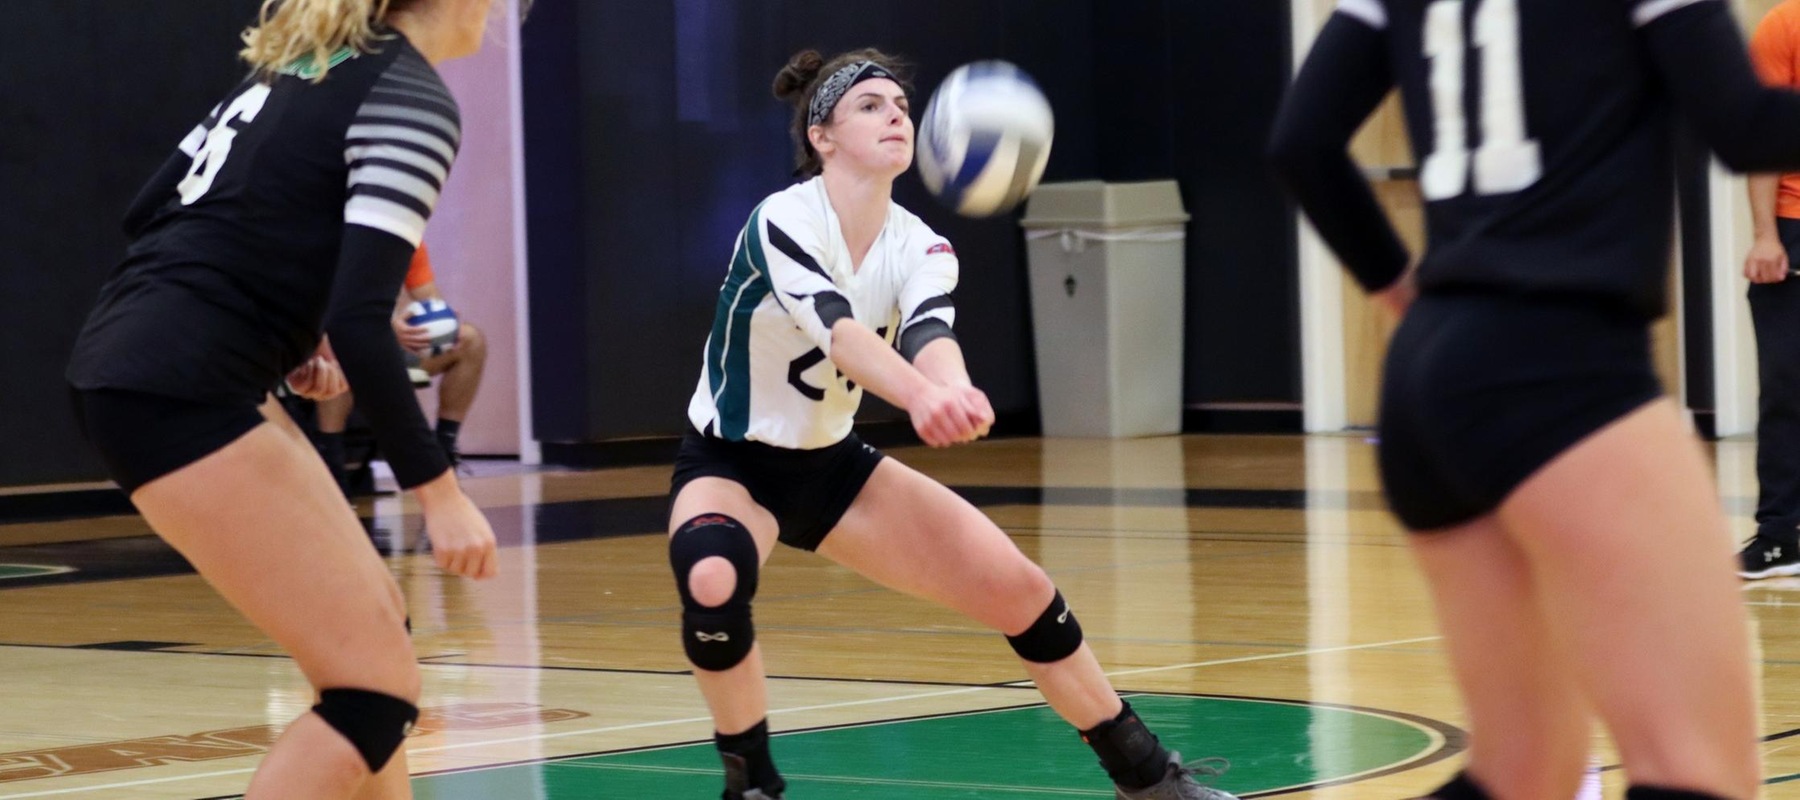 Libero Elly Collins collected 34 digs in four sets against Adelphi. Copyright 2022; Wilmington University. All rights reserved. Photo by Dan Lauletta. September 9, 2022 vs. Adelphi.